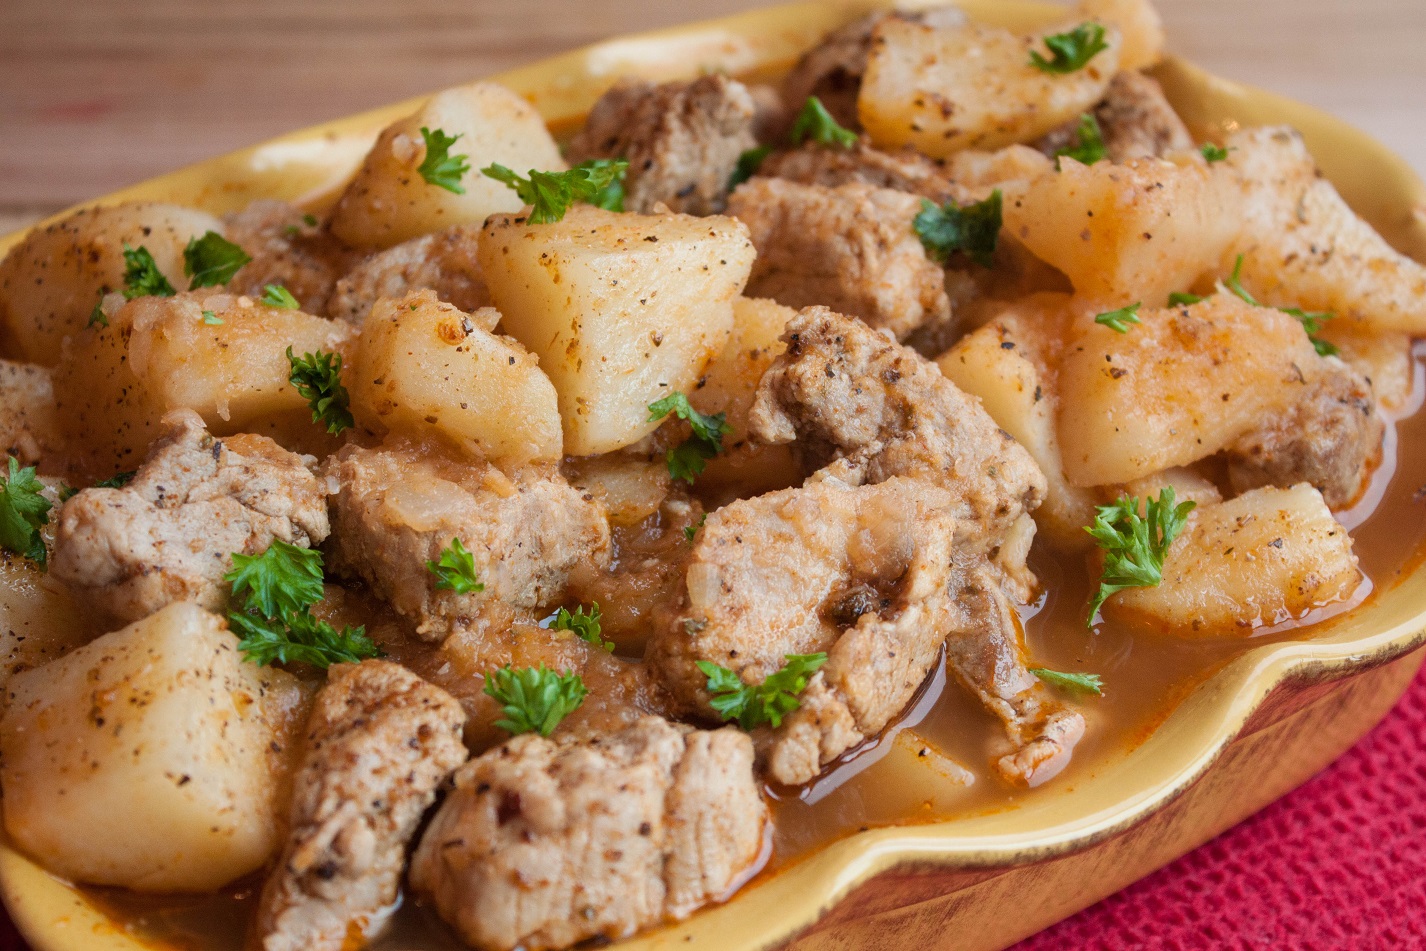 Pork and Potato Stew - delicious one-pot meal!